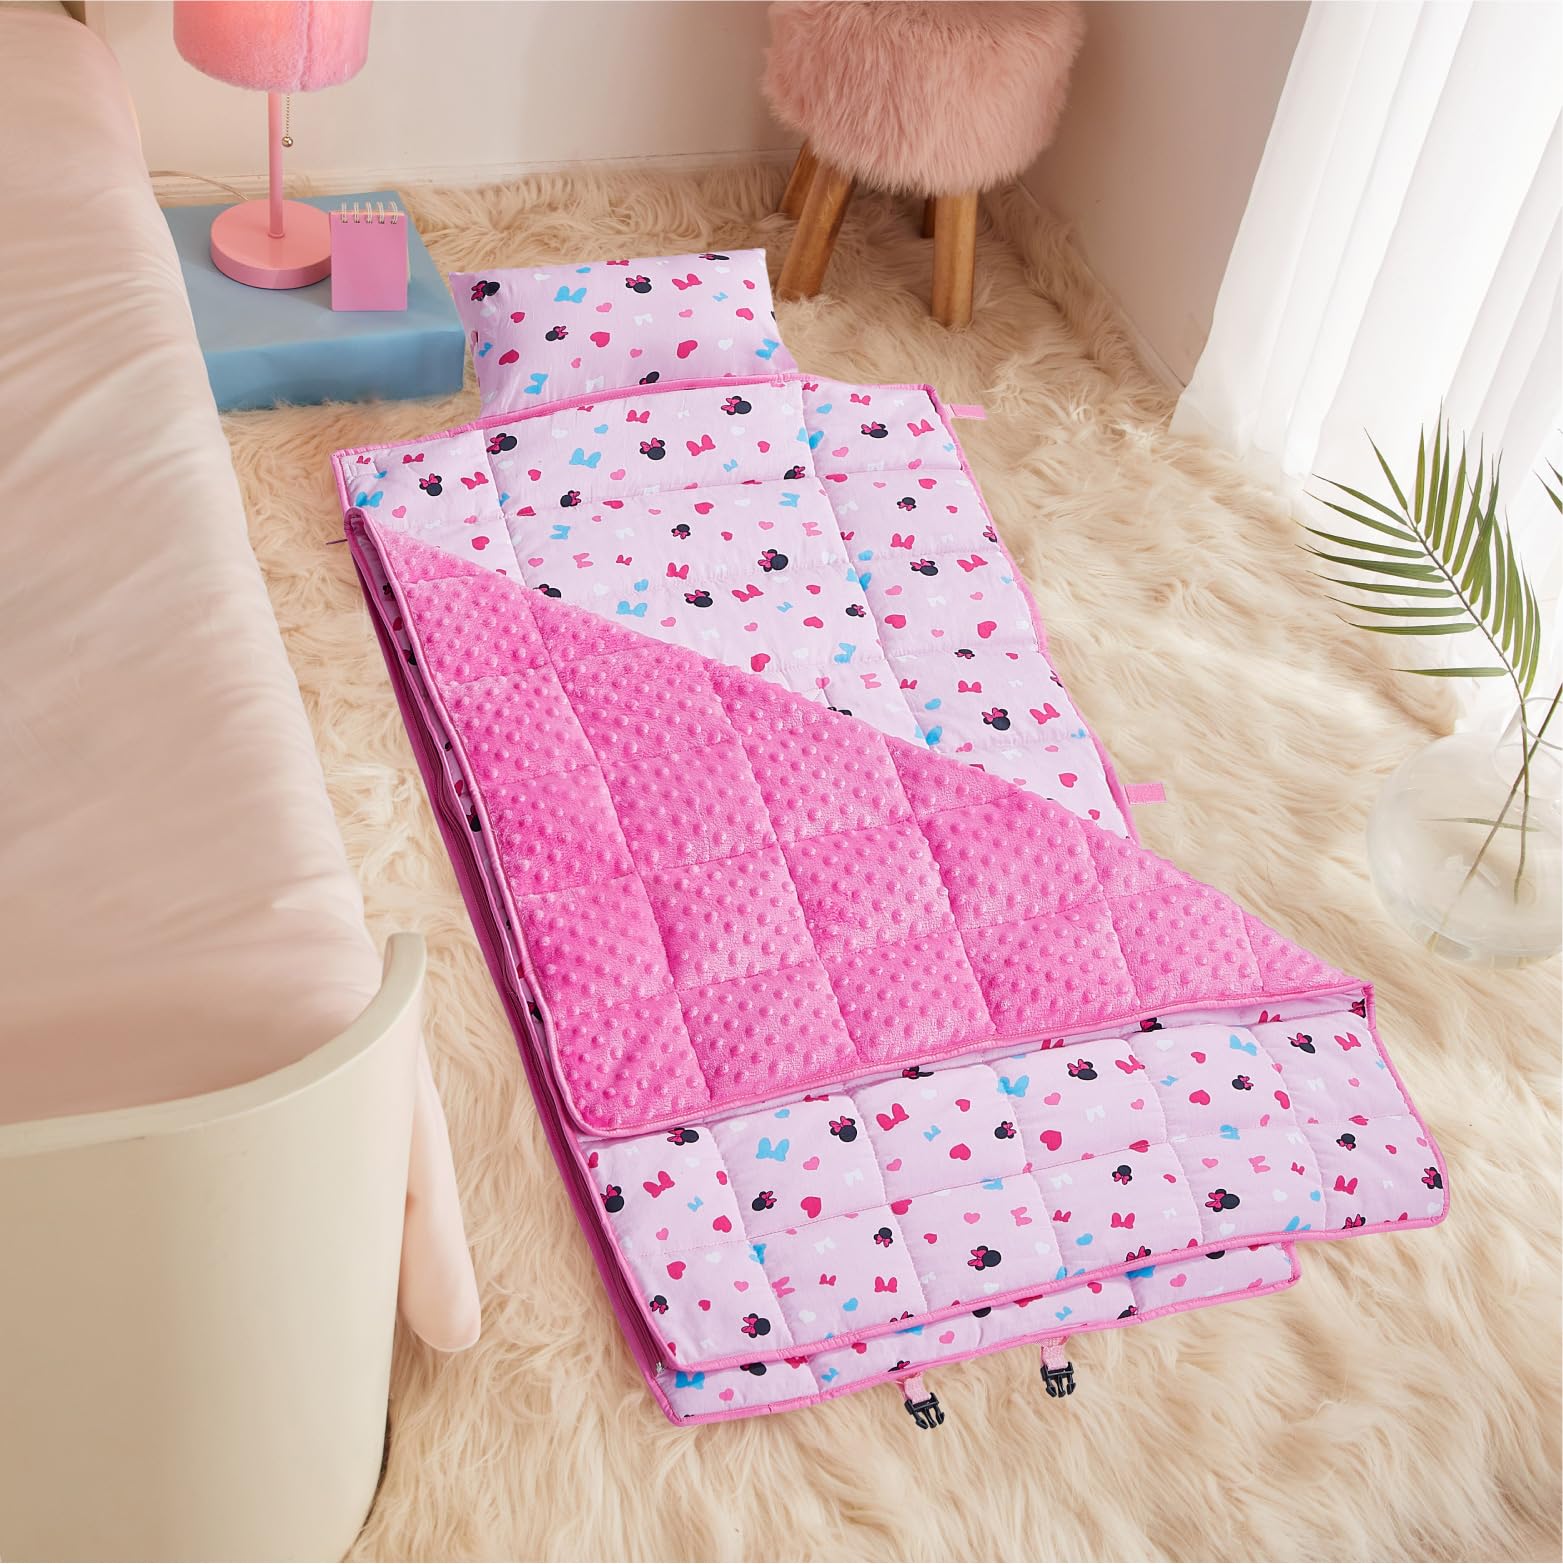 Disney Minnie Mouse 3-in-1 Travel Slumber Nap Mat with Built in Pillow, Plush Blanket and Carry Backpack Straps, 46